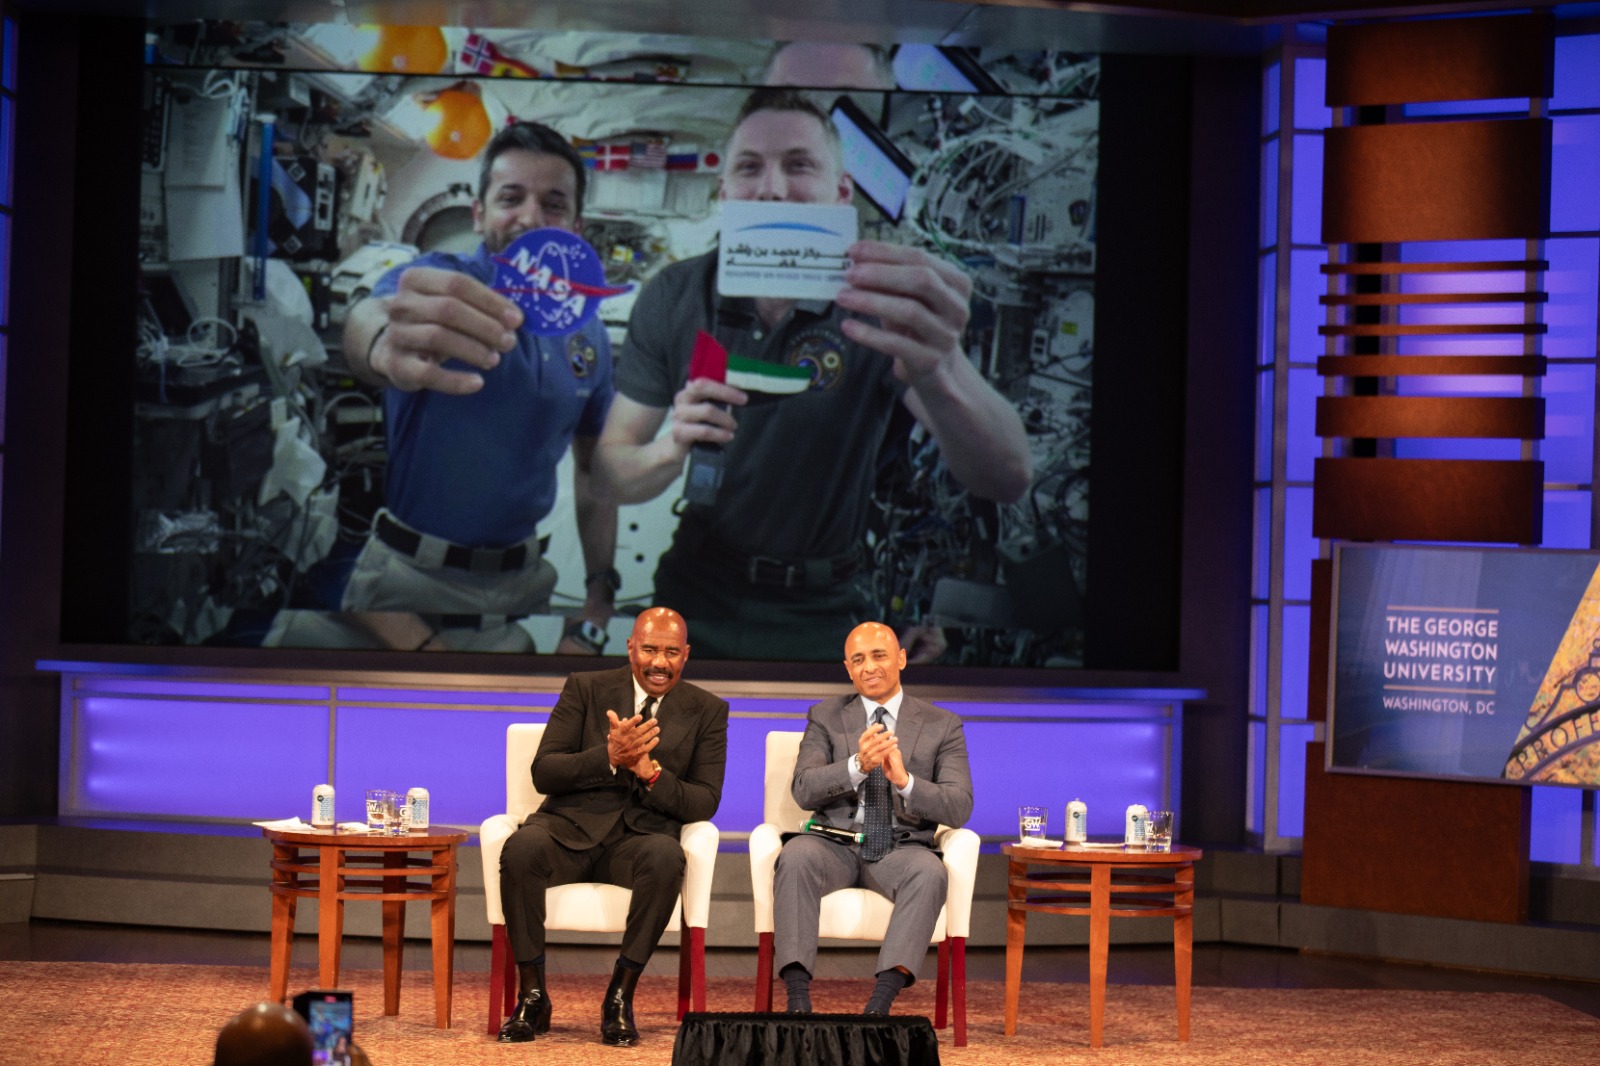 Steve Harvey Astronauts Call from Space